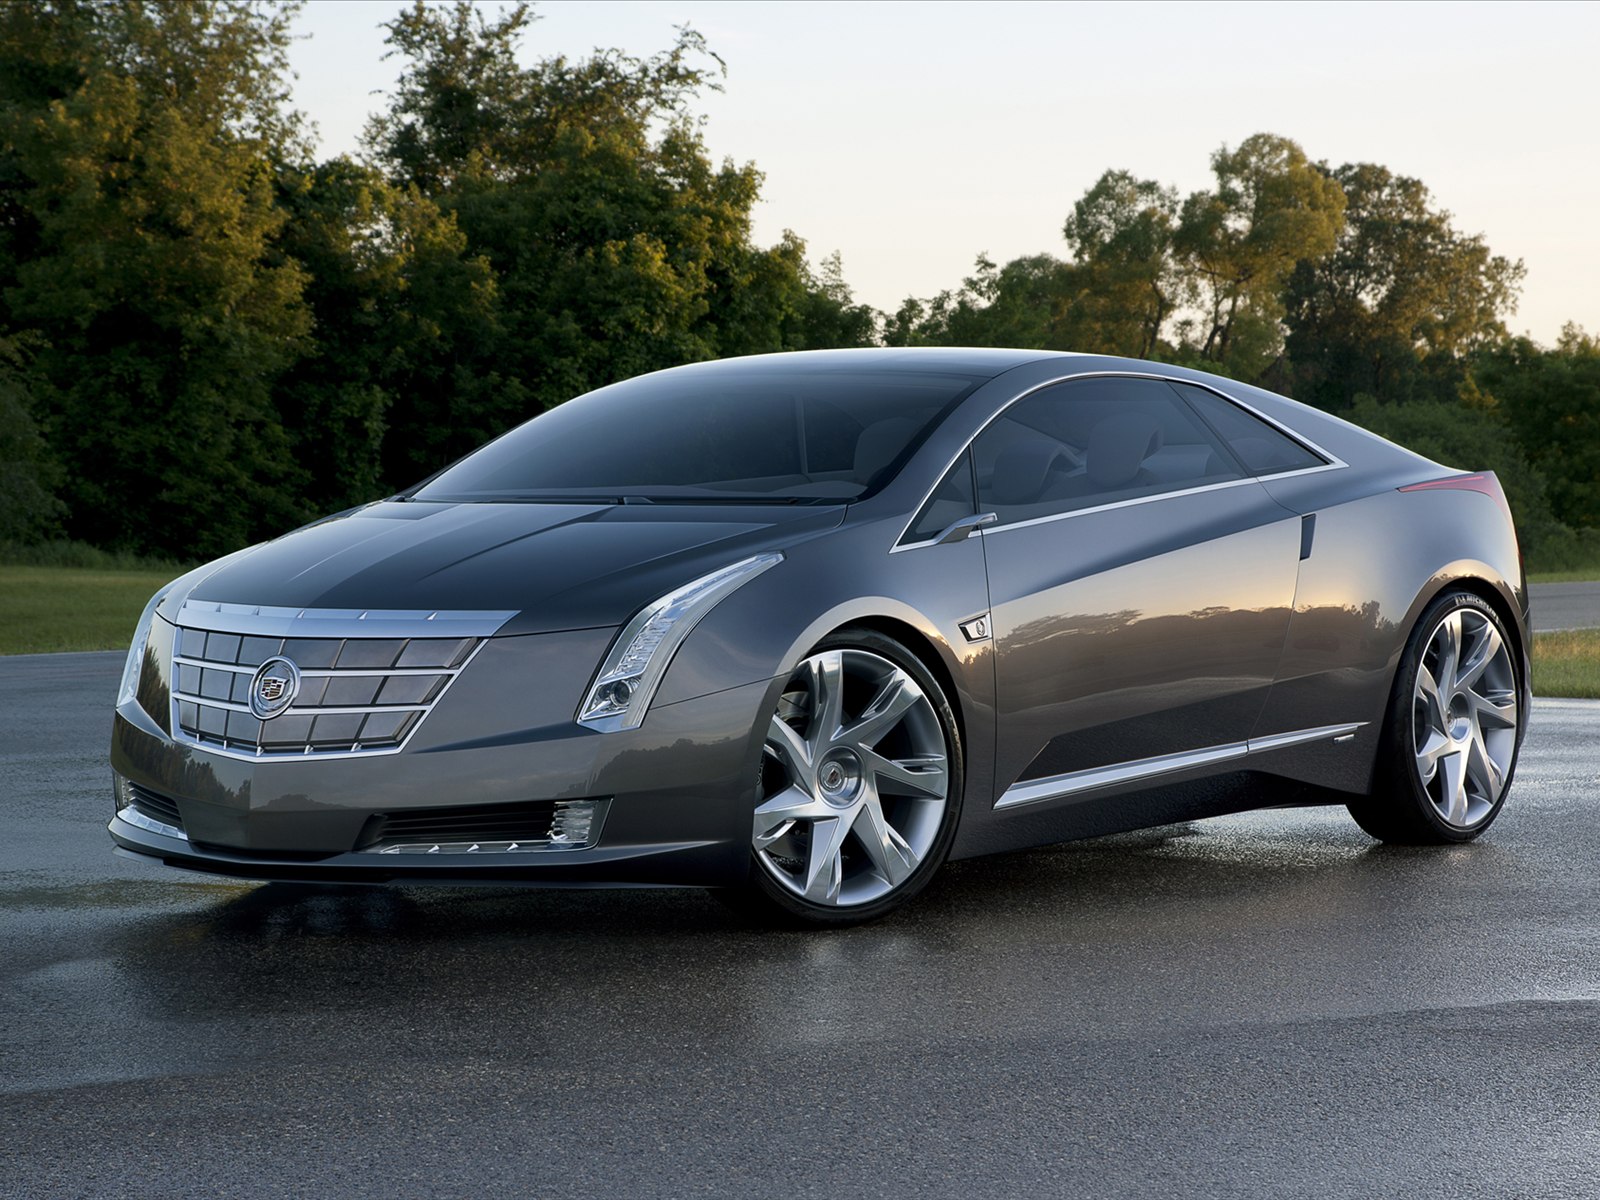 cadillac-elr-2012-electric-car-pictures-04.jpg (1600×1200)